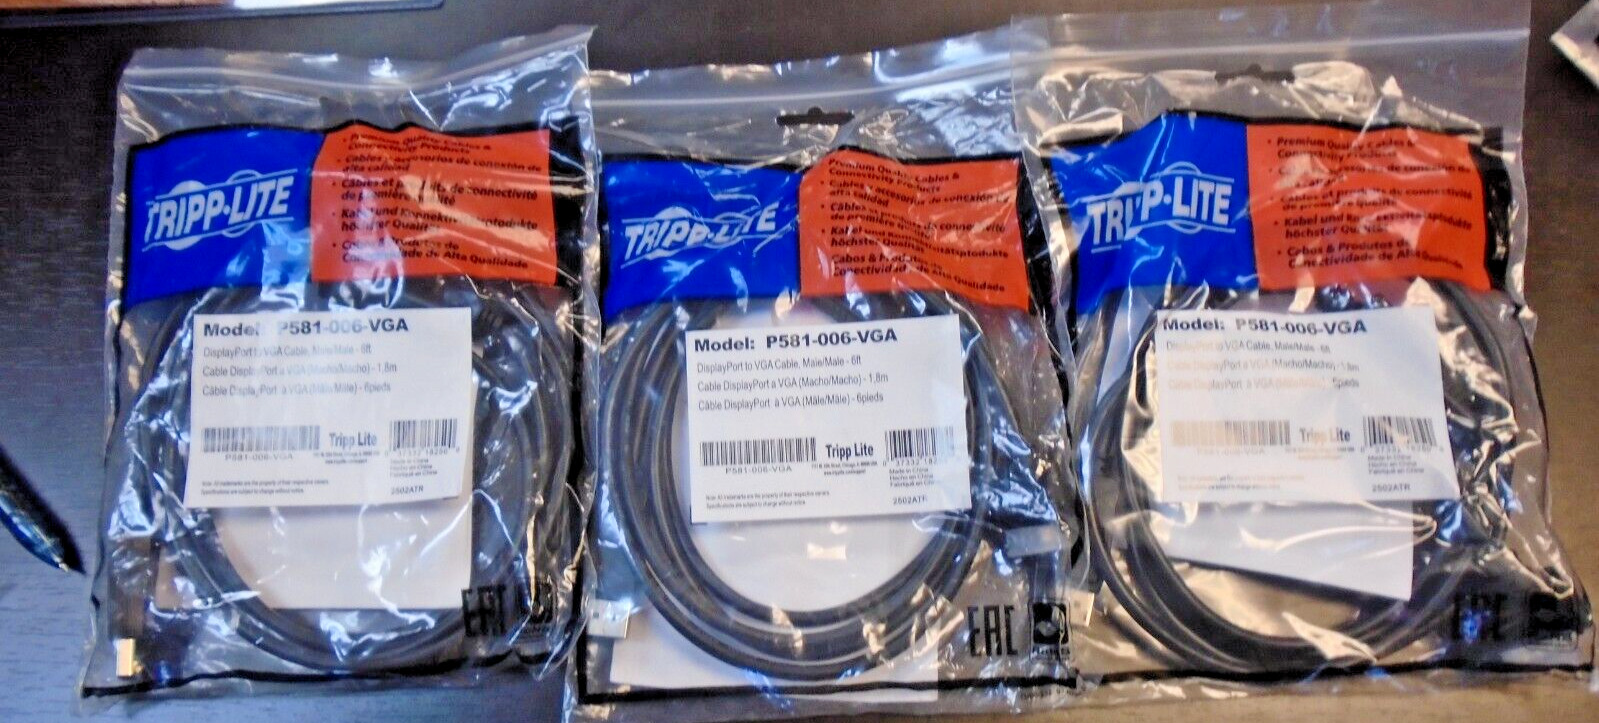 NEW Tripp Lite P581-006-VGA DisplayPort 1.2 to VGA Adapter Cable 6 ft. LOT OF 3